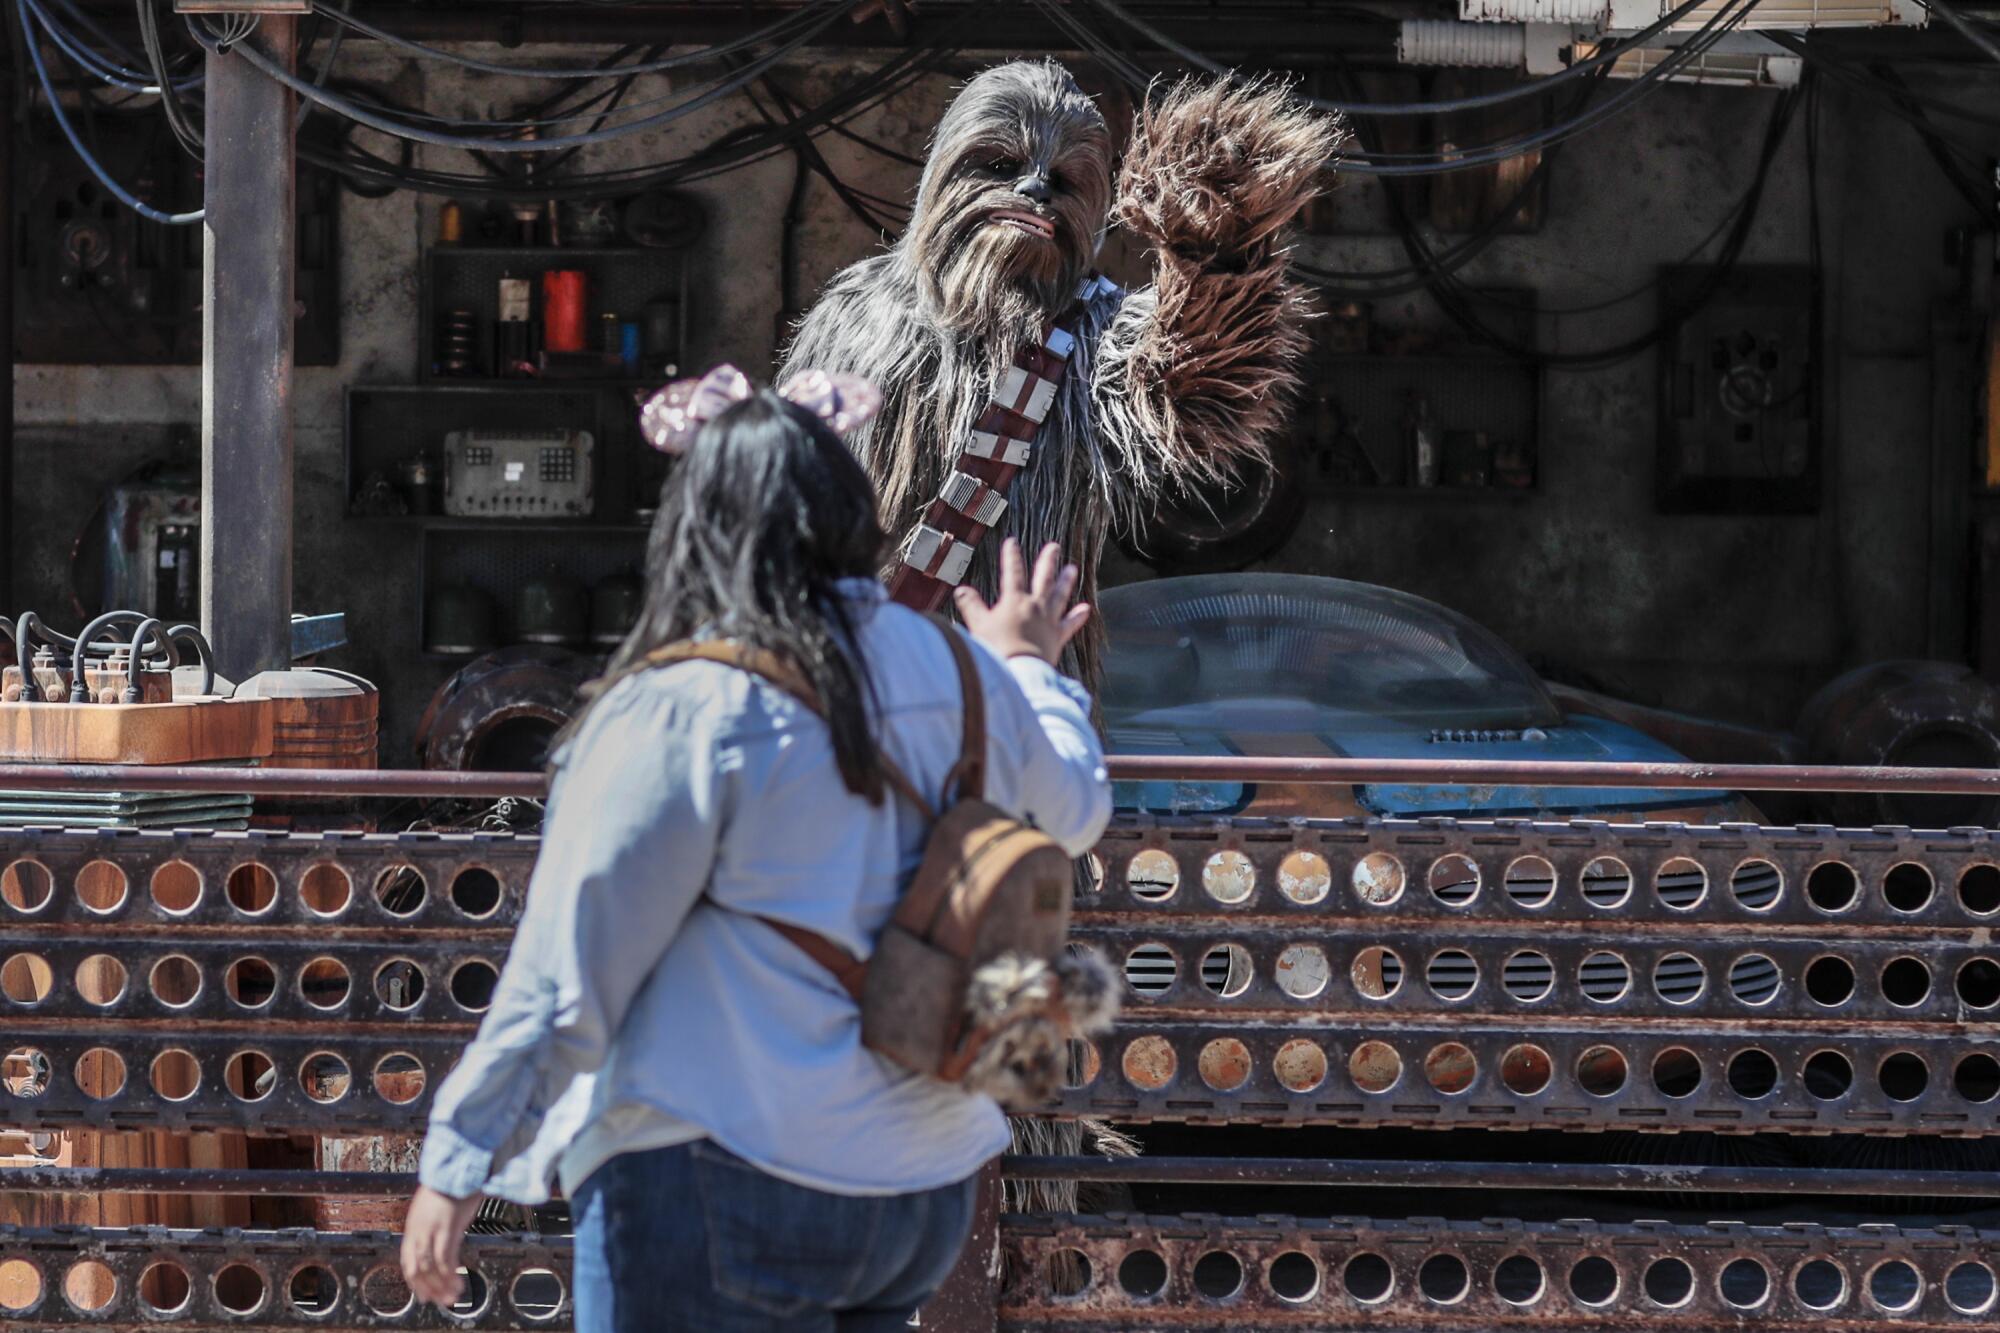 Chewbacca greets a park guest in the Star Wars Galaxy's Edge area at Disneyland.